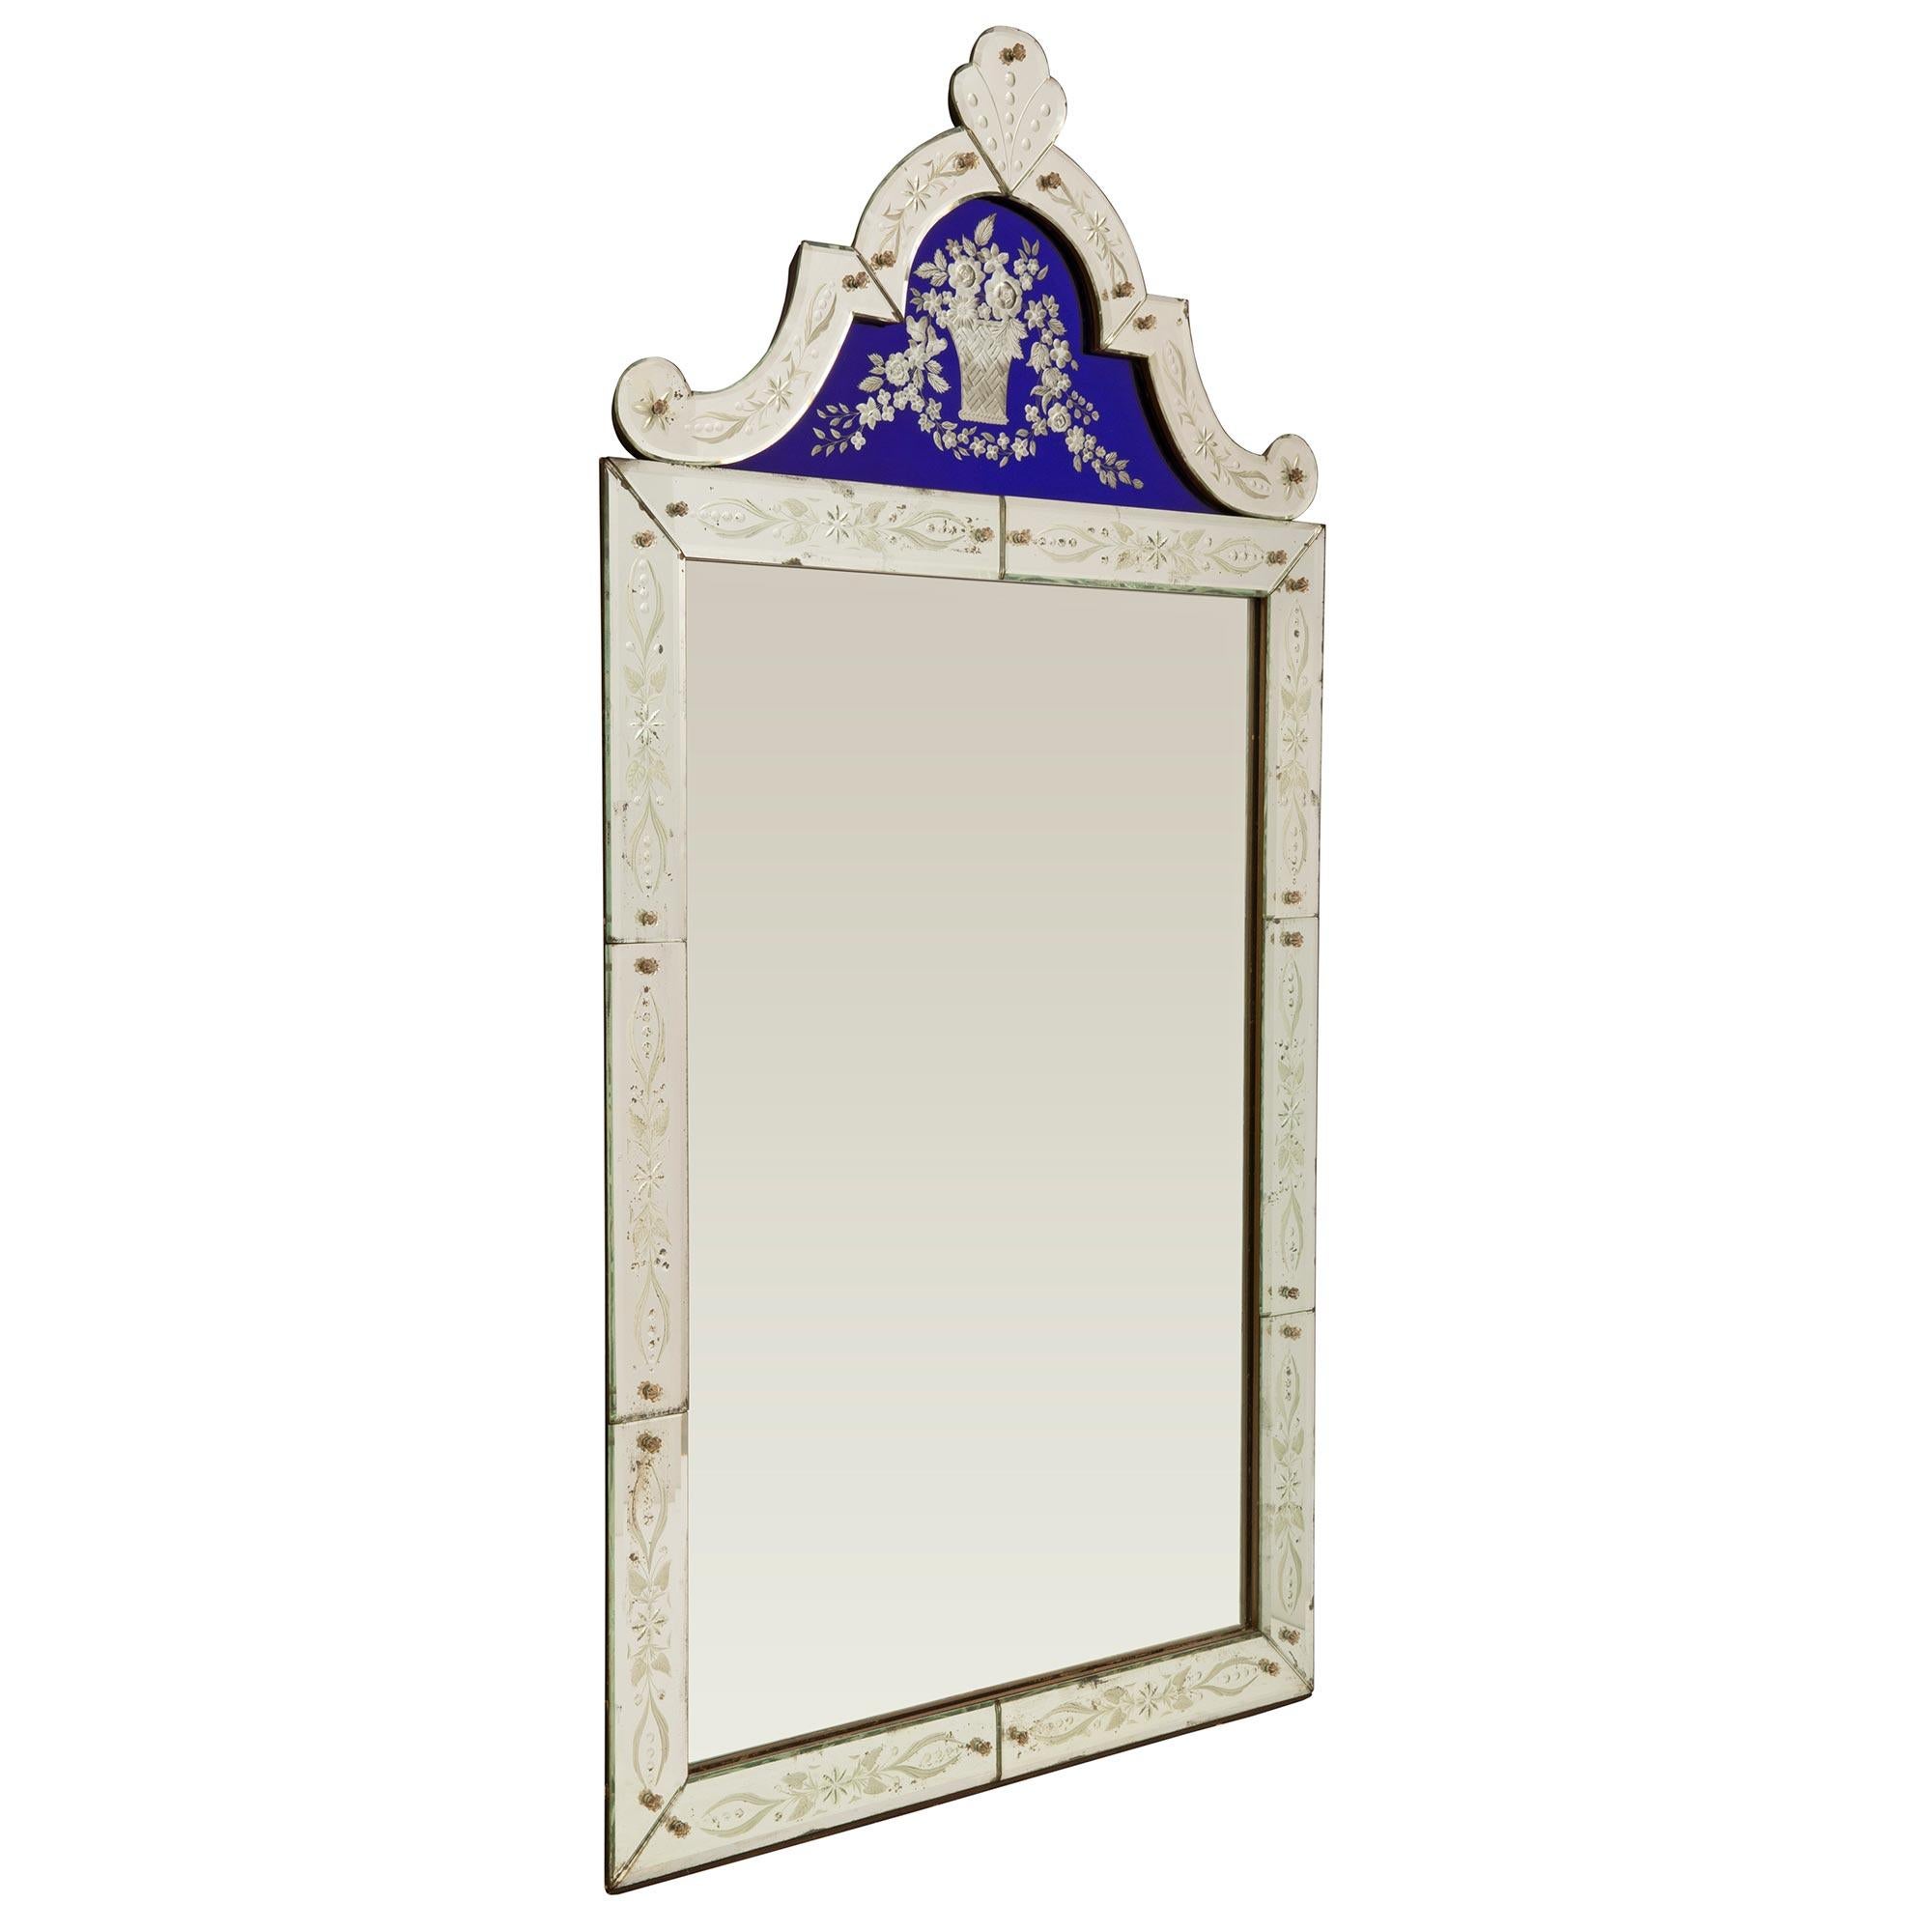 A stunning and extremely decorative Italian turn of the century Venetian mirror. The beautiful mirror retains all of its original mirror plates throughout with the central mirror framed within lovely etched mirror plates with wonderfully executed